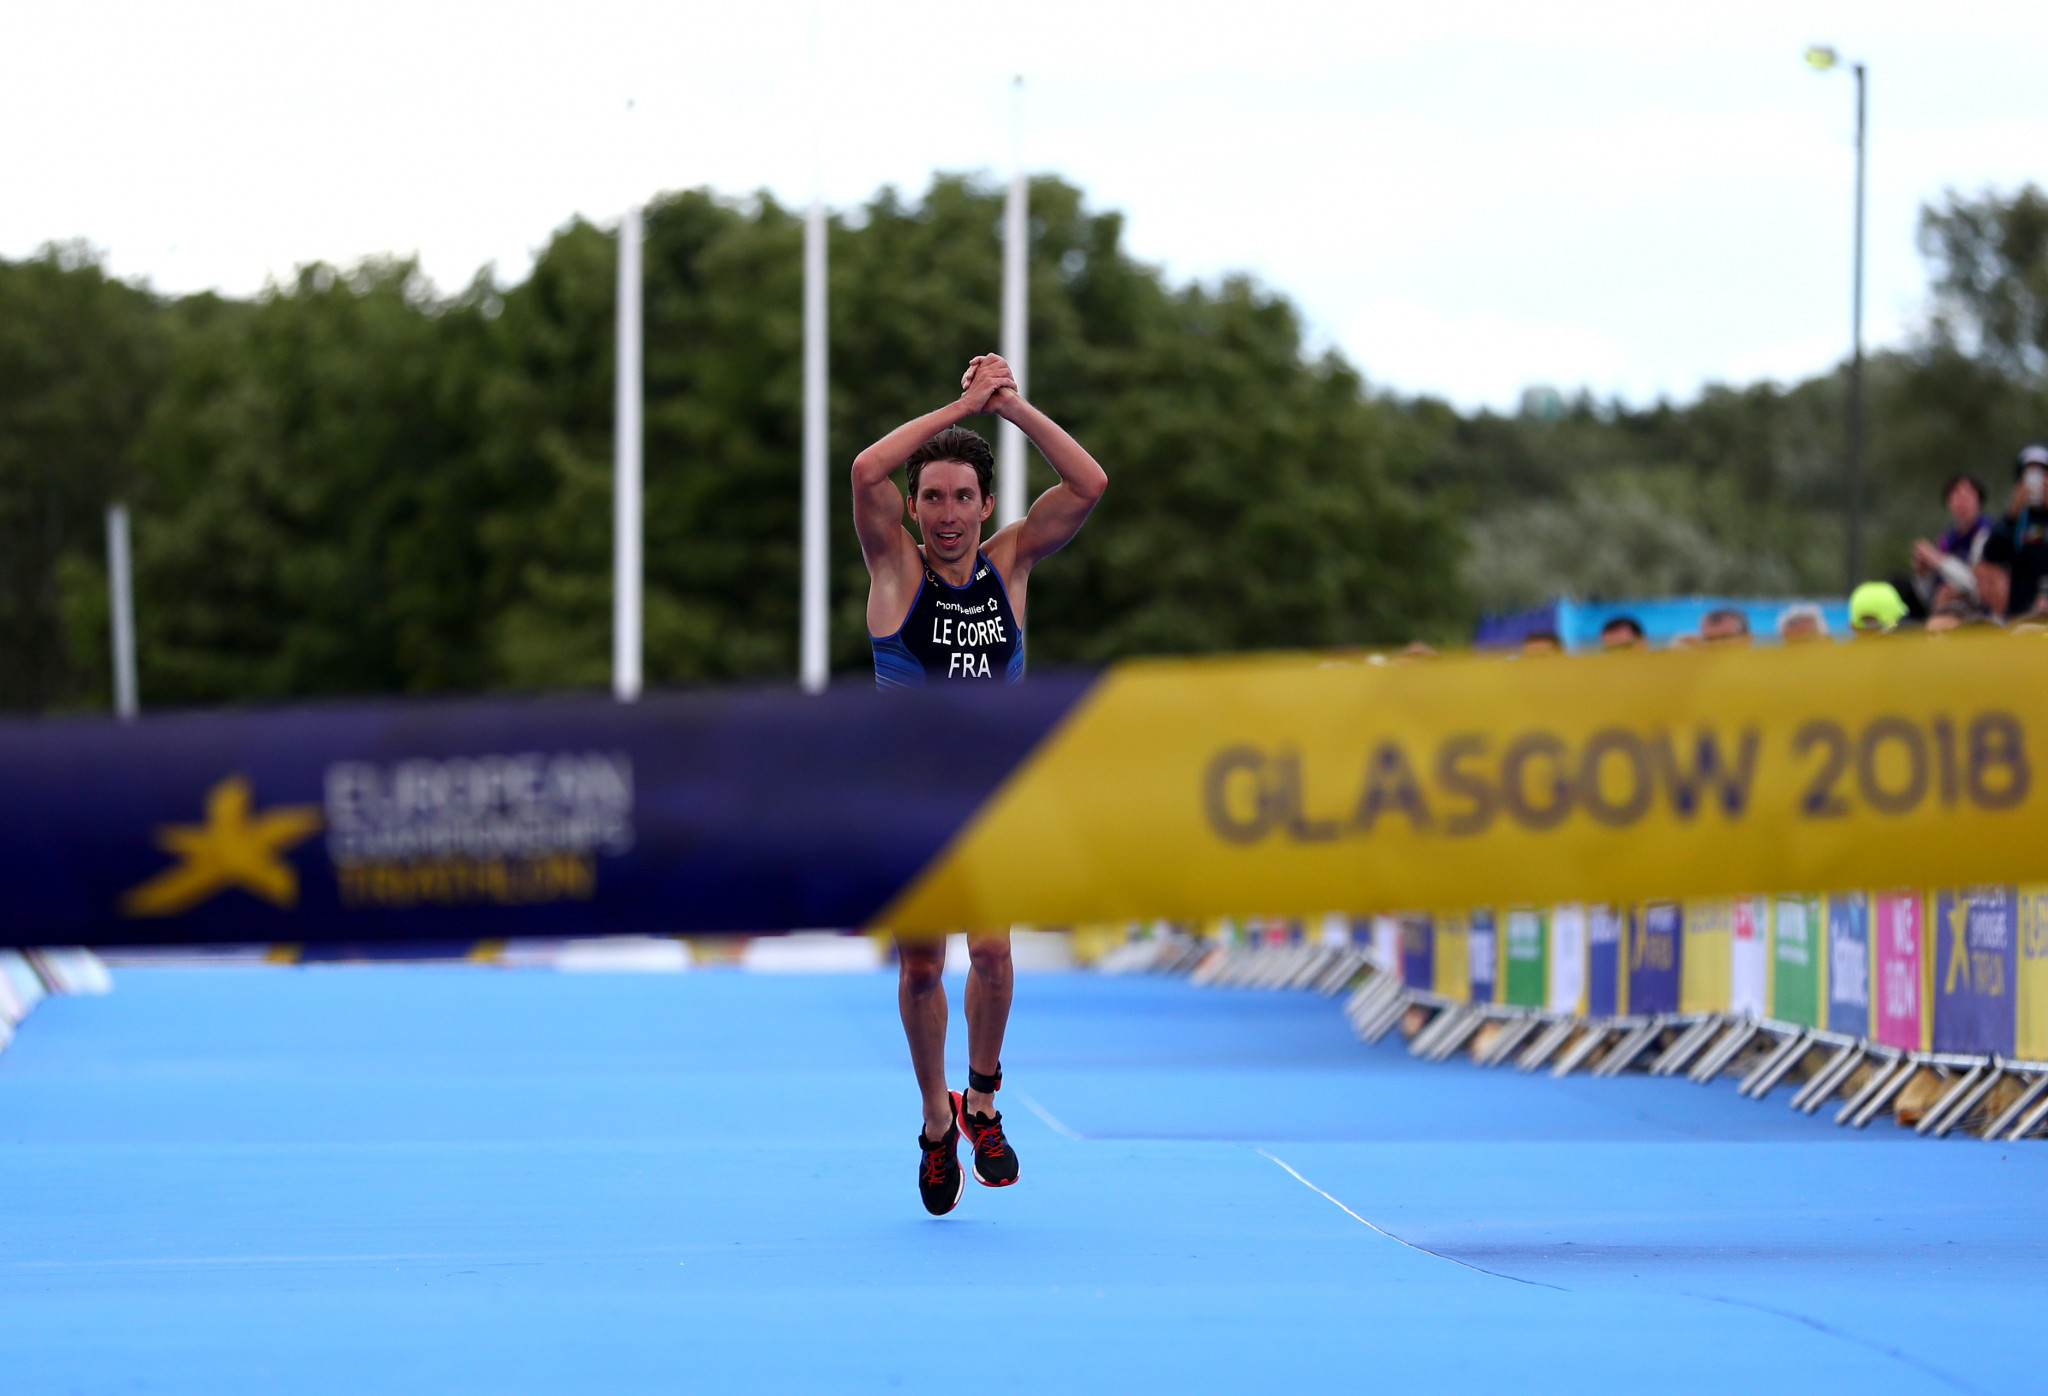 Le Corre clinches men's European Championships triathlon title as Alarza charges to second